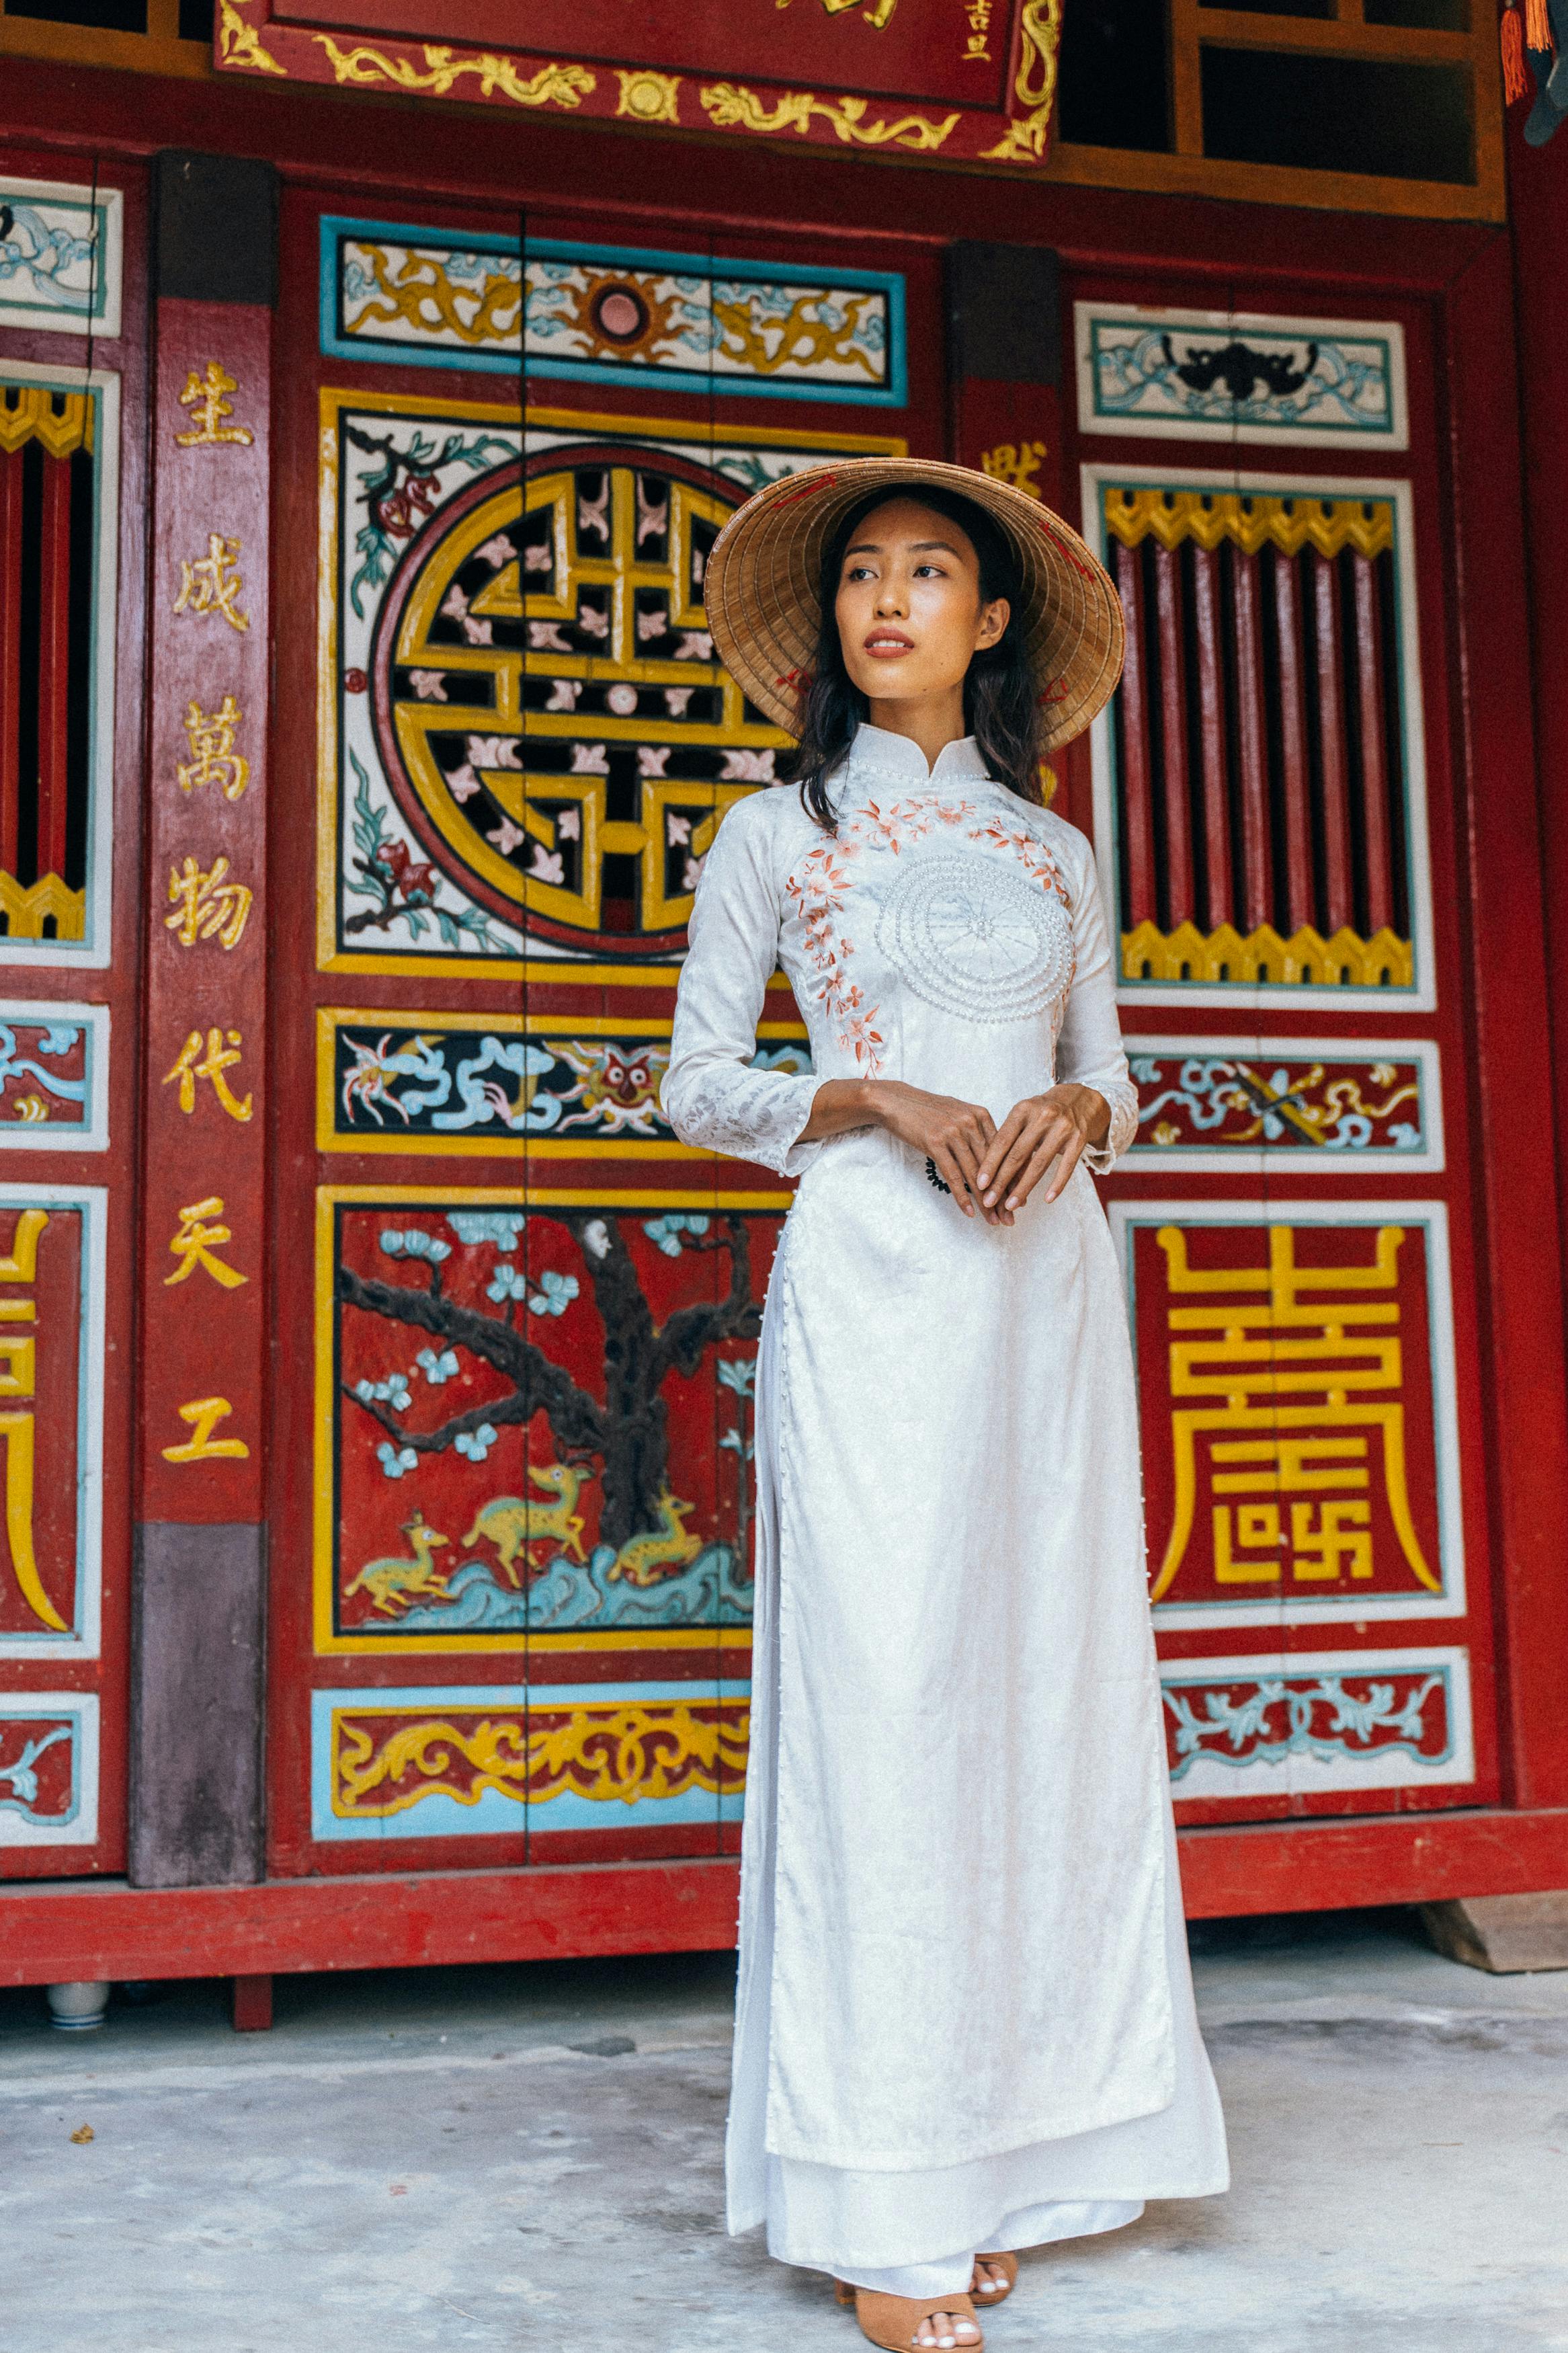 a woman in white traditional dress wearing conical hat